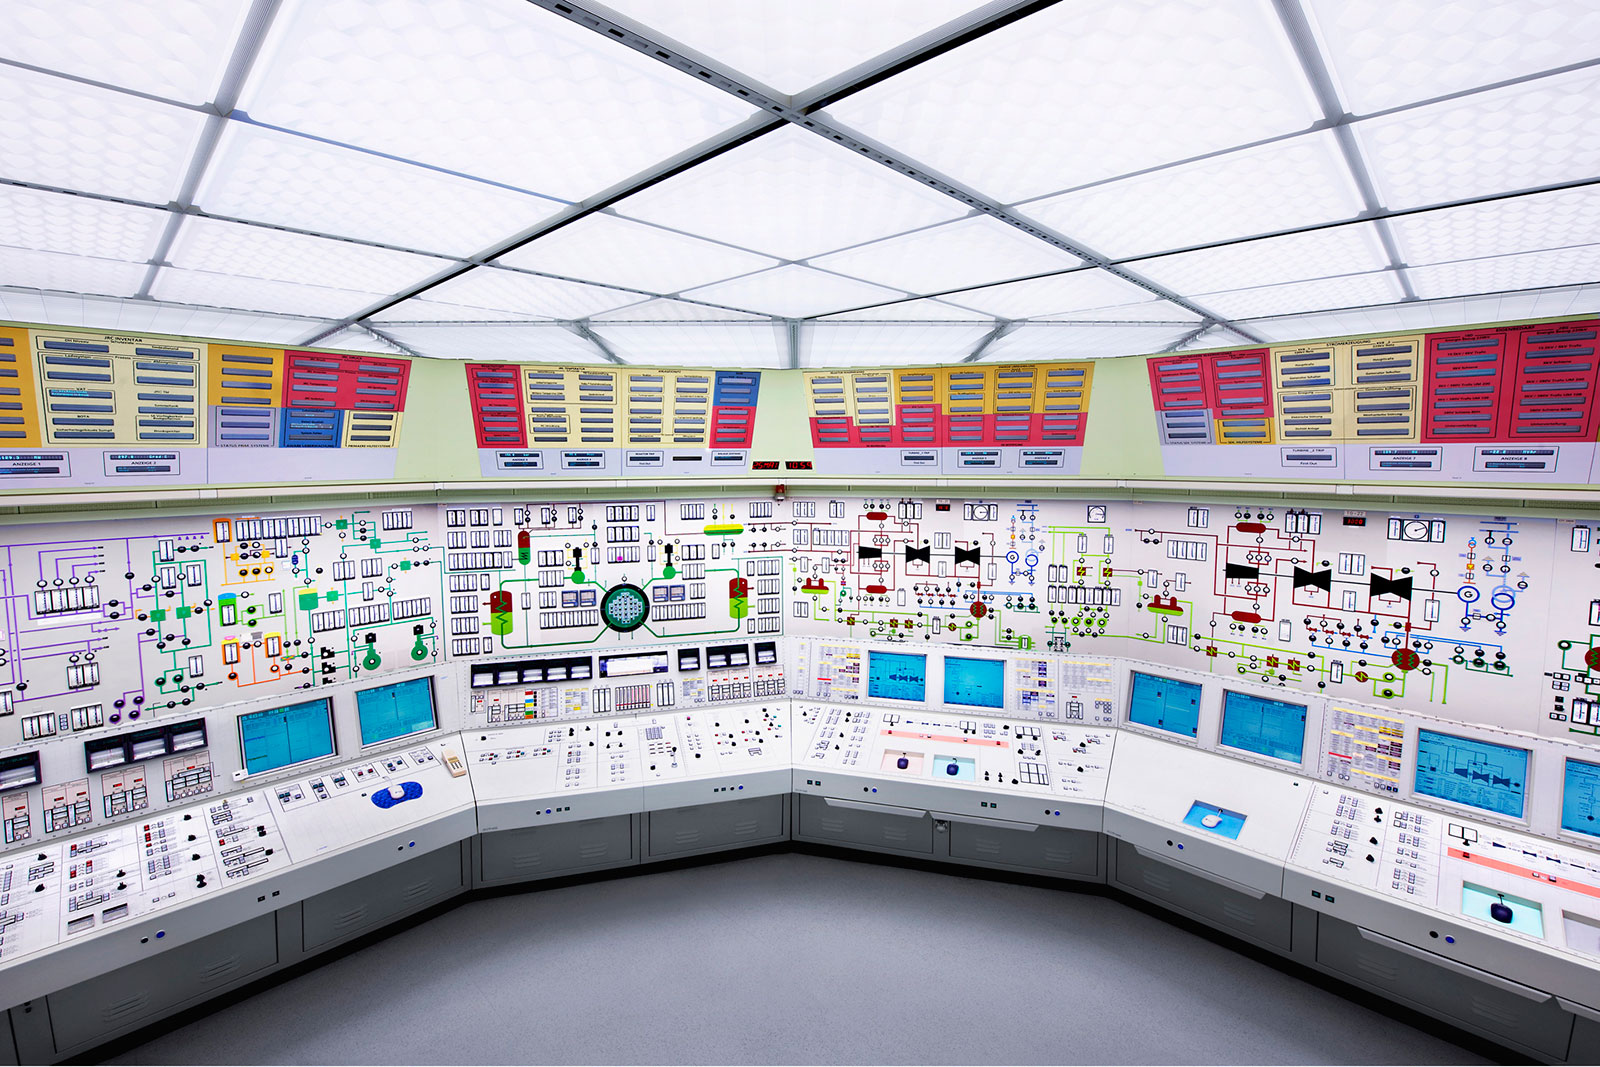 Impressive sci-fi like photos taken from inside of a nuclear power plant